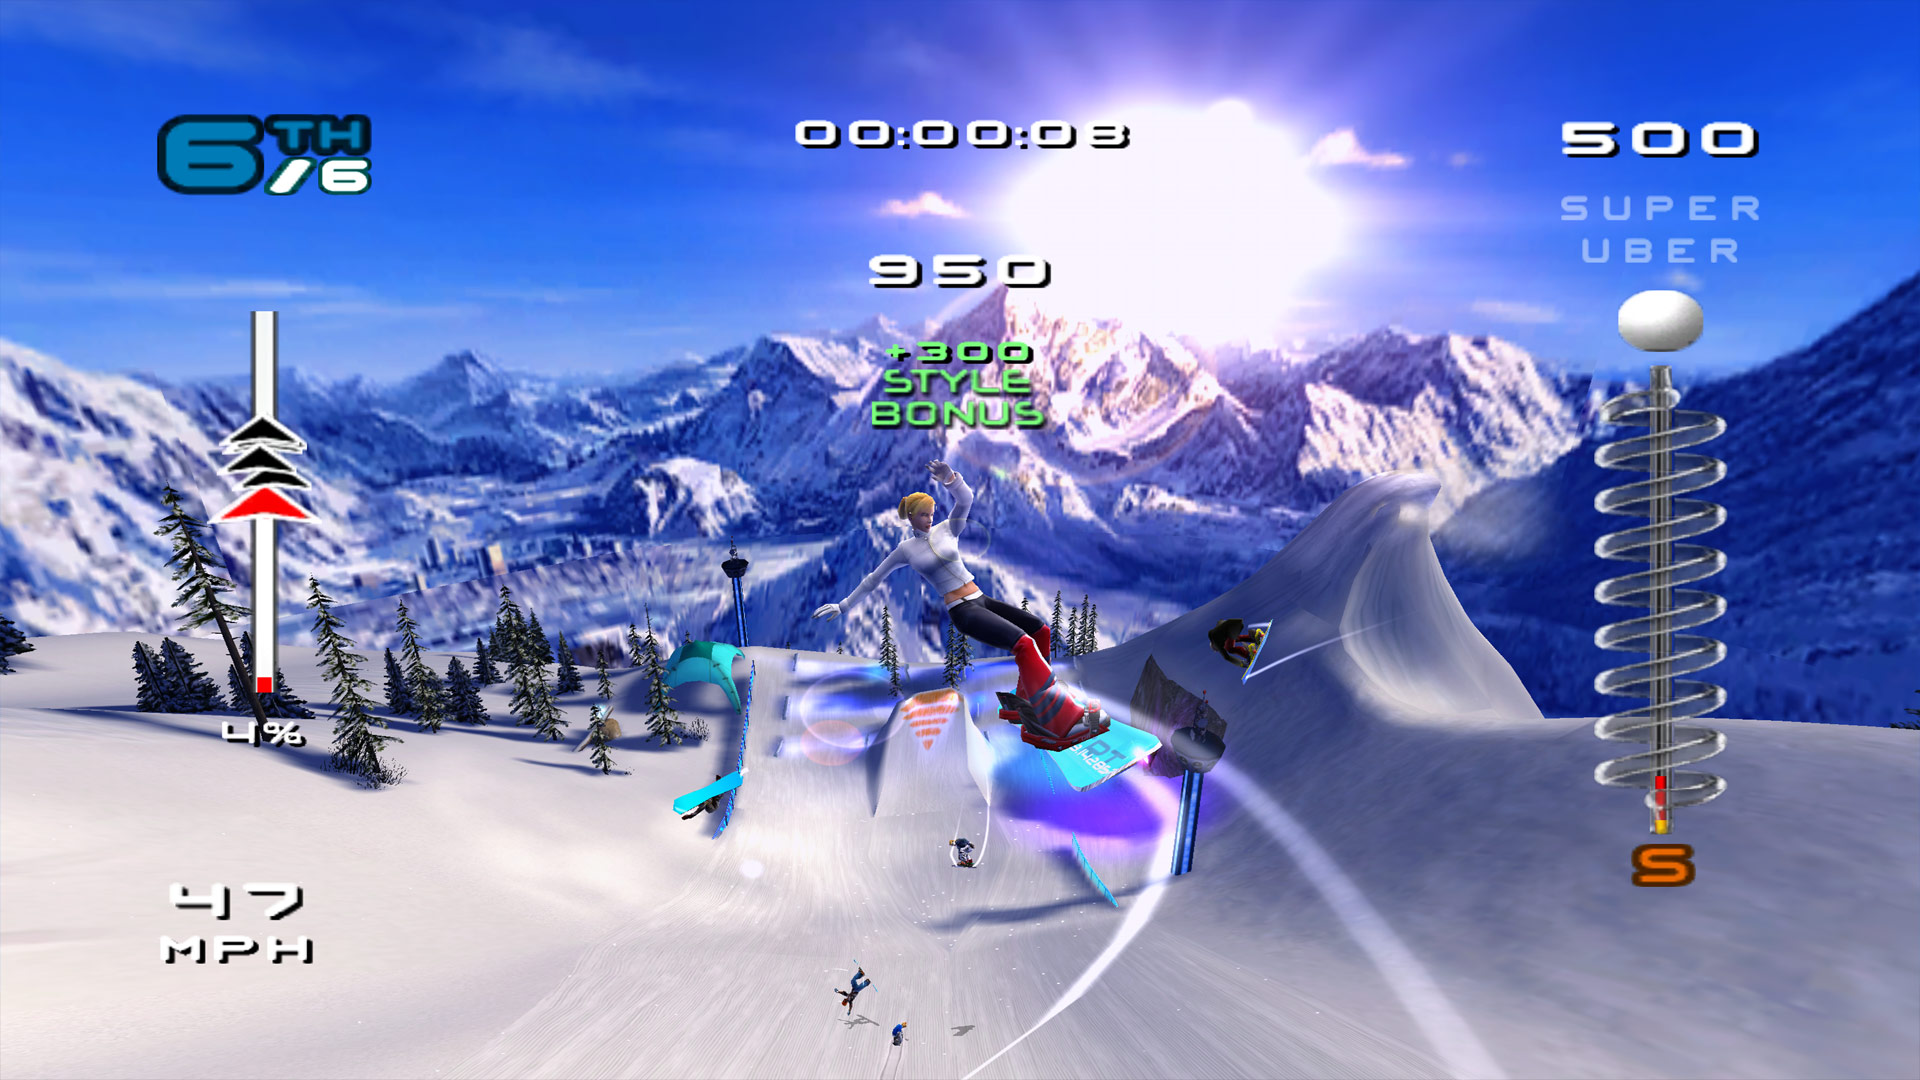 SSX 3 Xbox One X Enhanced Preview from hands-on gameplay - Gamerheadquarter...